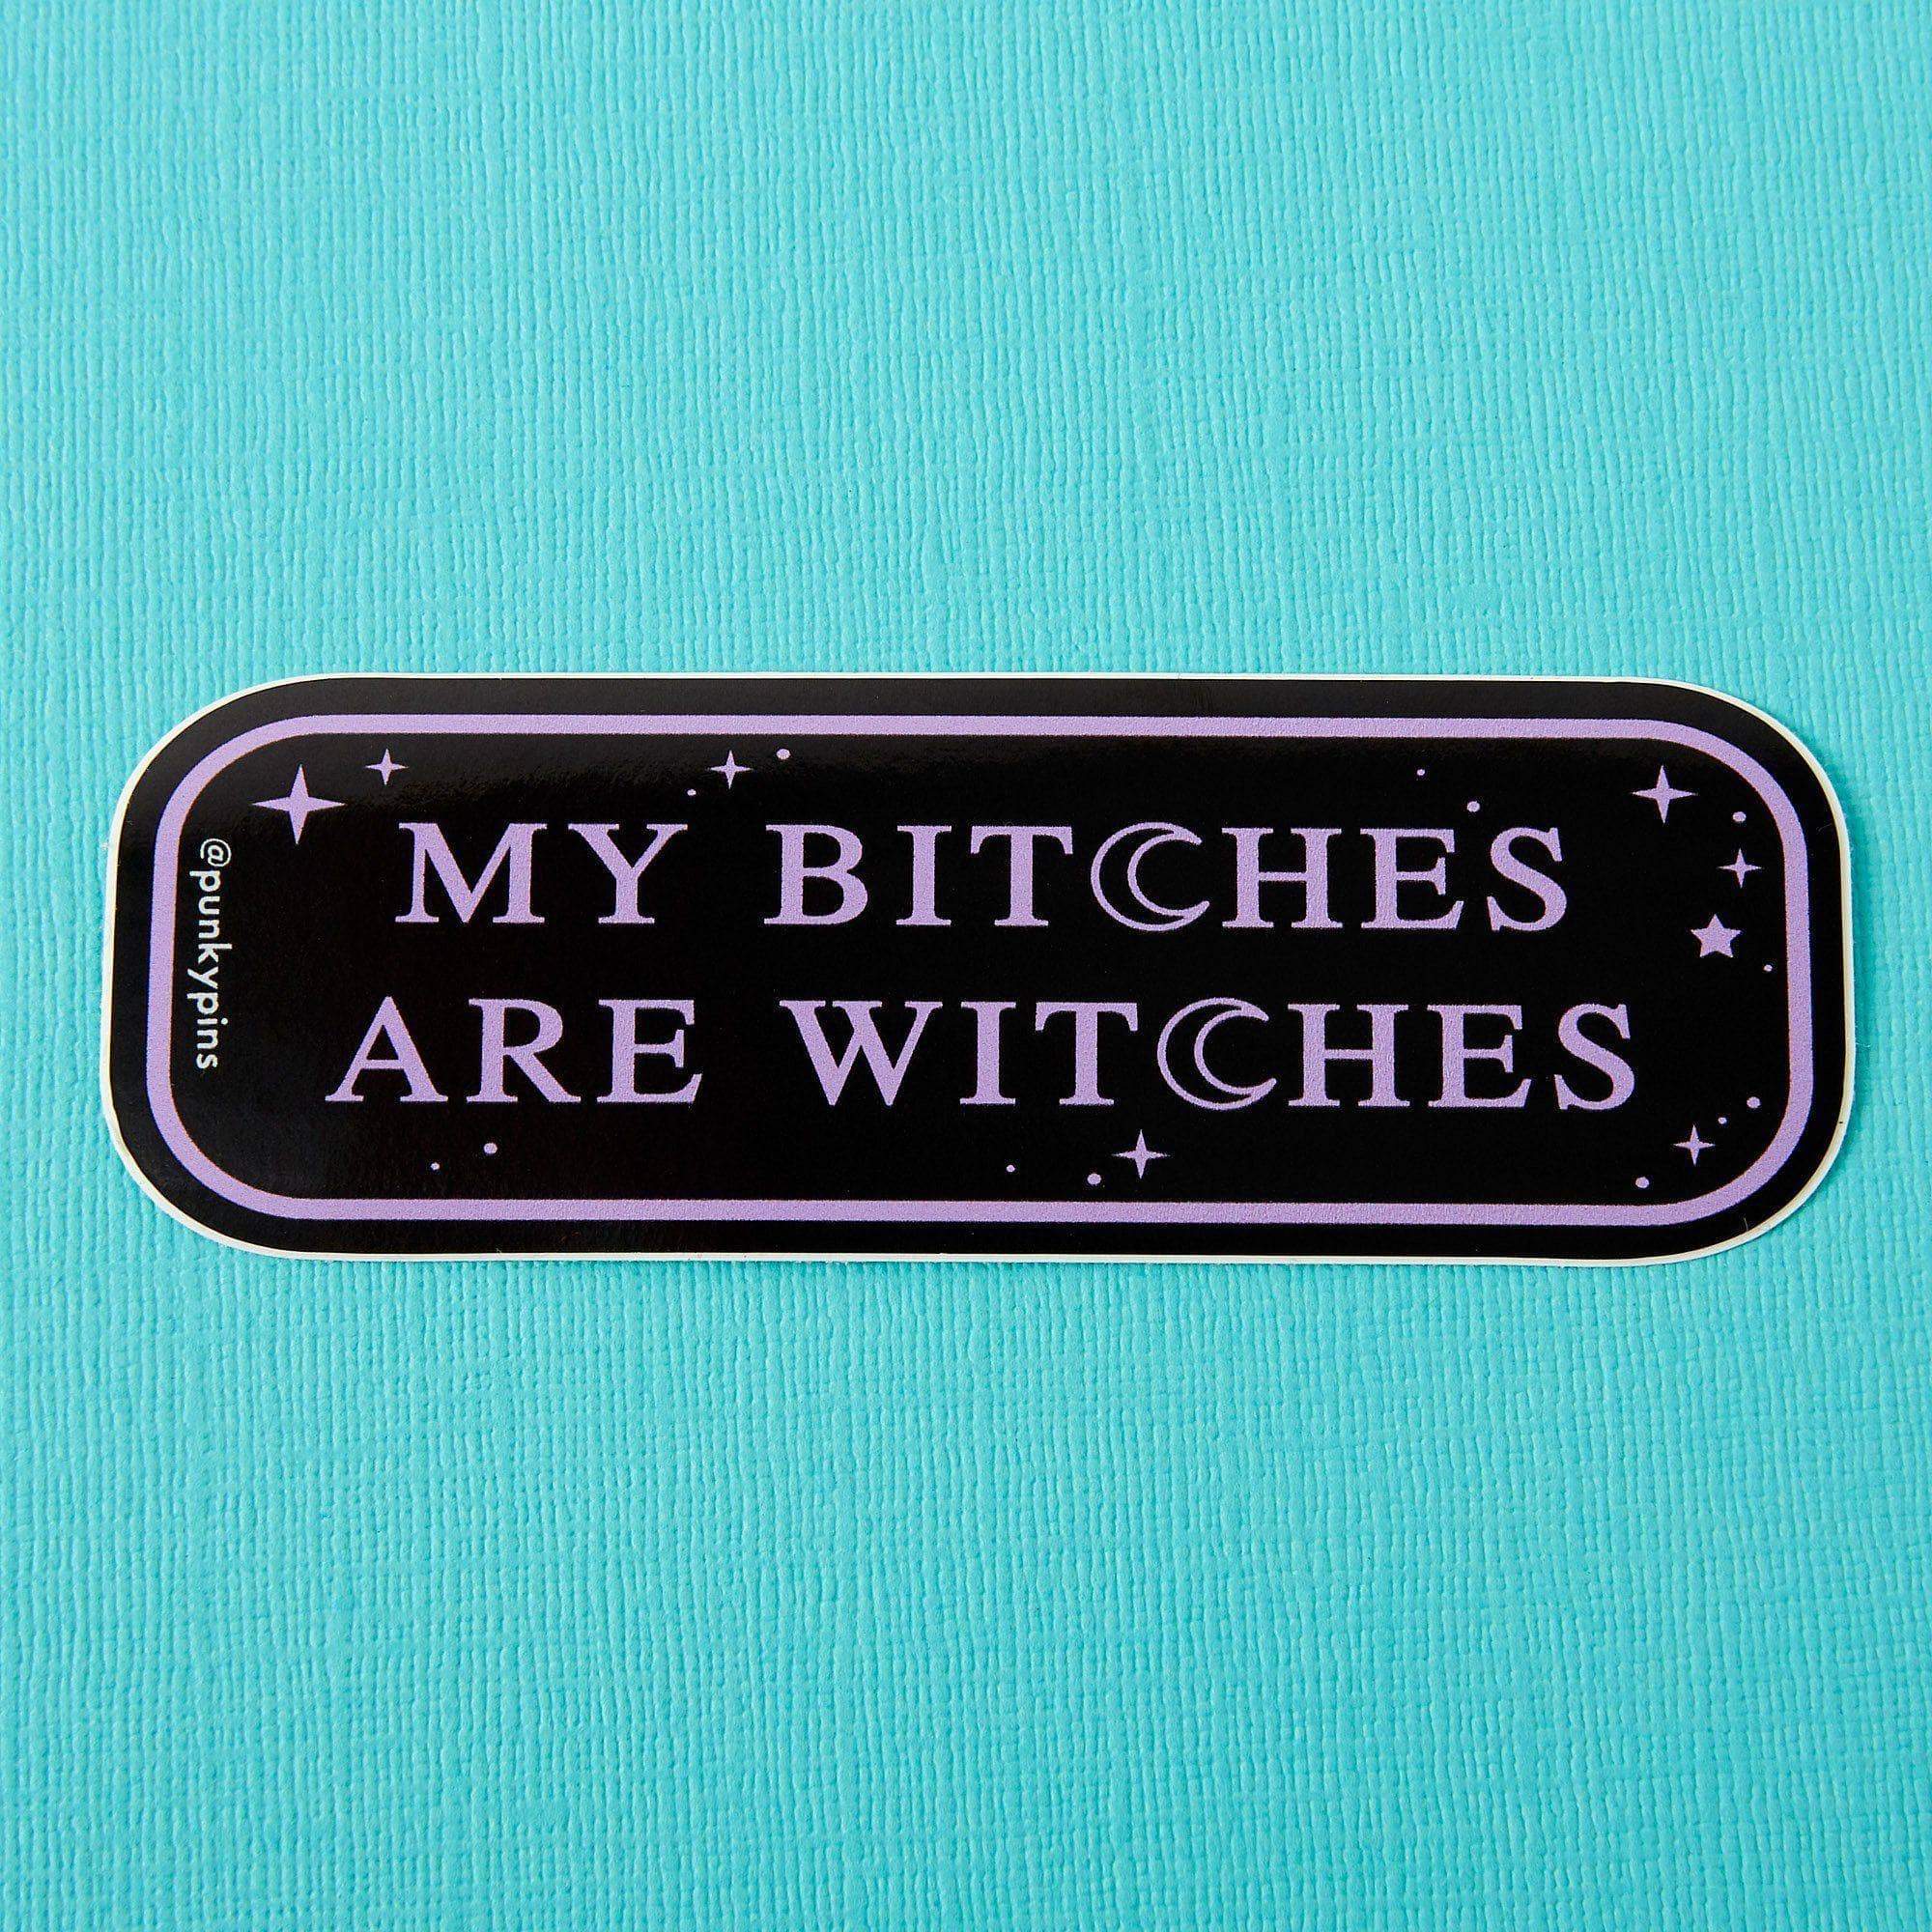 My Bitches are Witches Vinyl Sticker